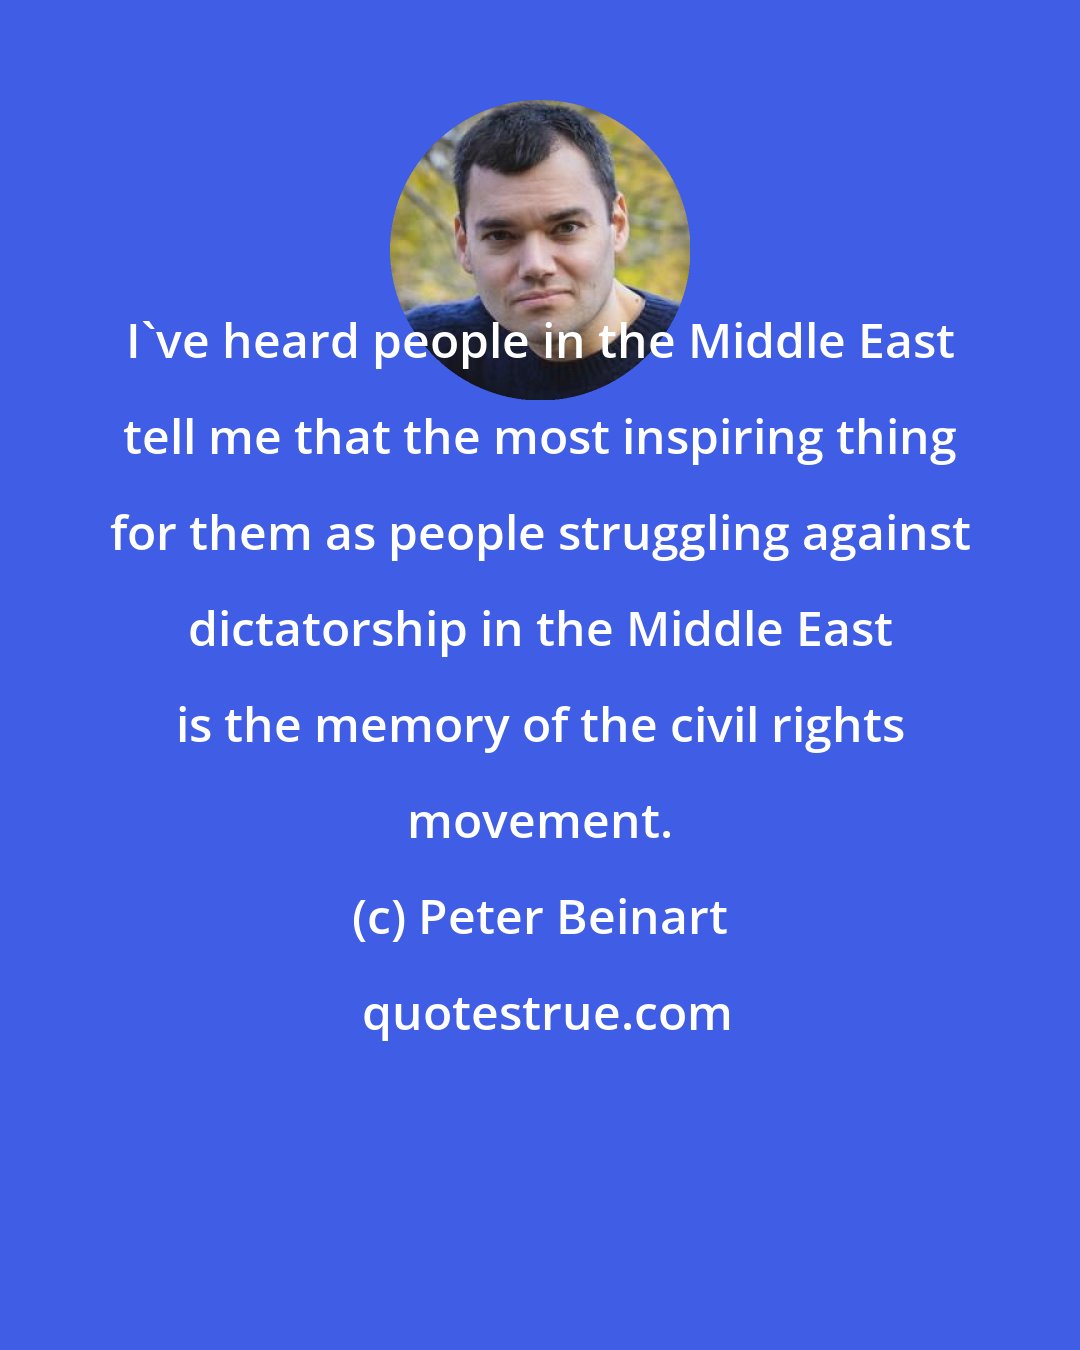 Peter Beinart: I've heard people in the Middle East tell me that the most inspiring thing for them as people struggling against dictatorship in the Middle East is the memory of the civil rights movement.